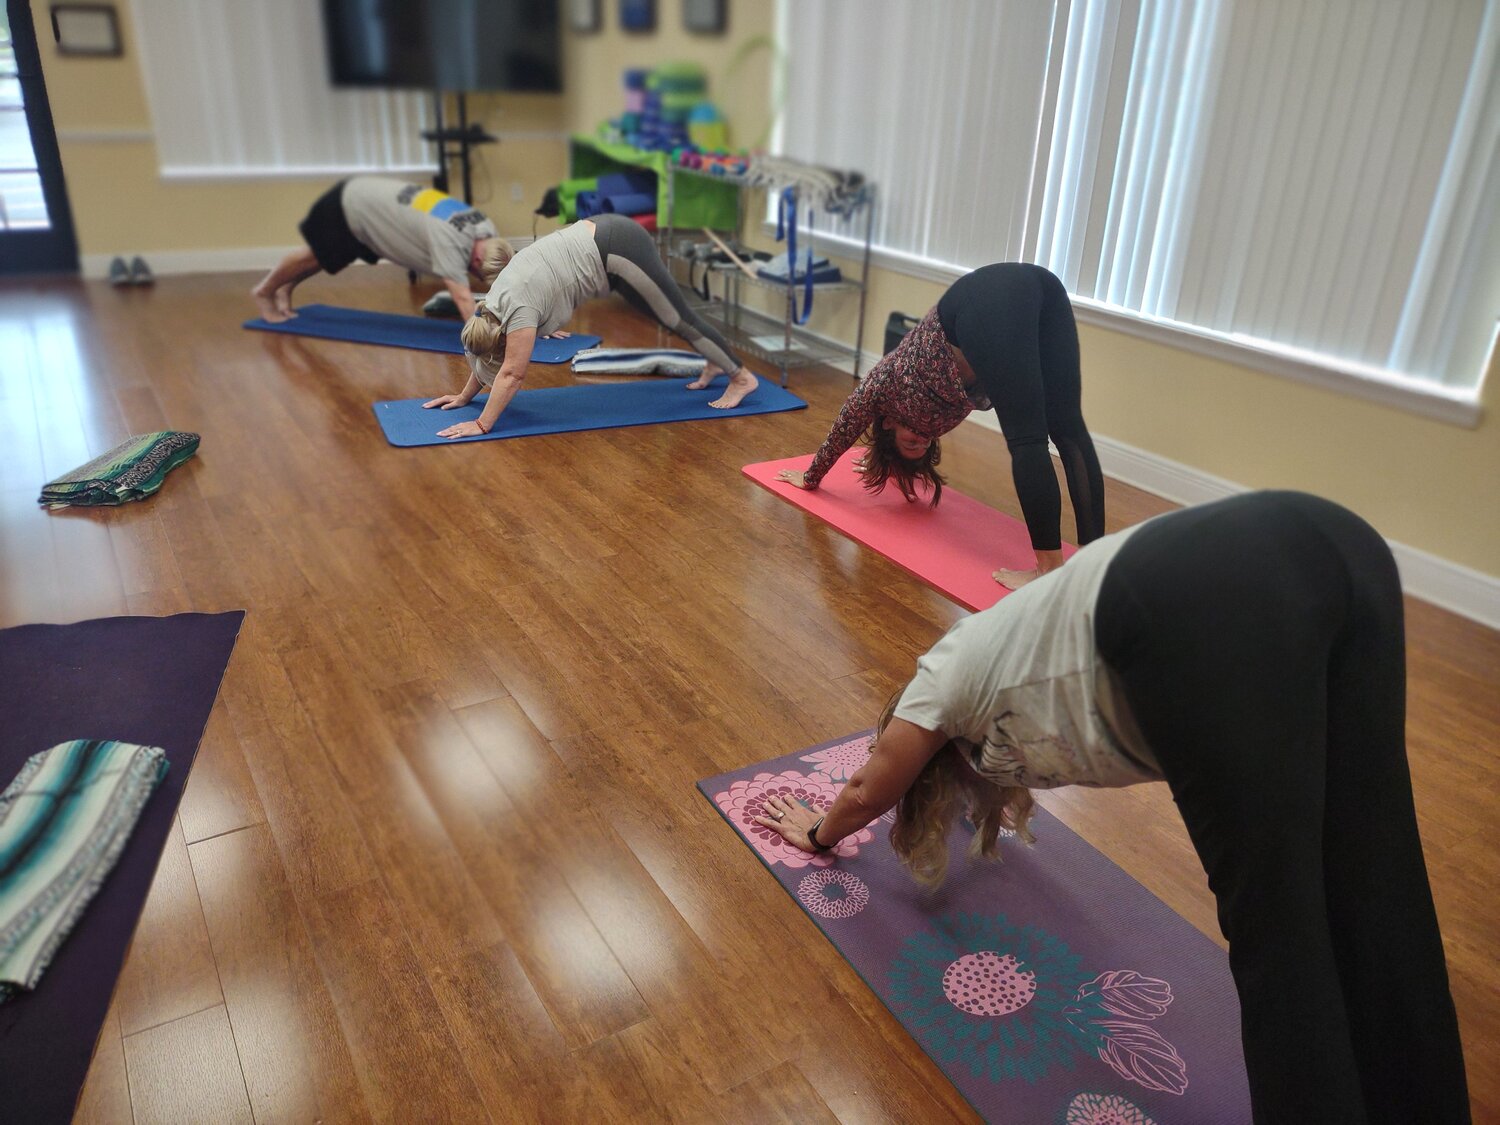 Nancy Peterson, Inni Whitmill, Elizabeth Barrios and Elvis Gronoff demonstrate the downward dog position.